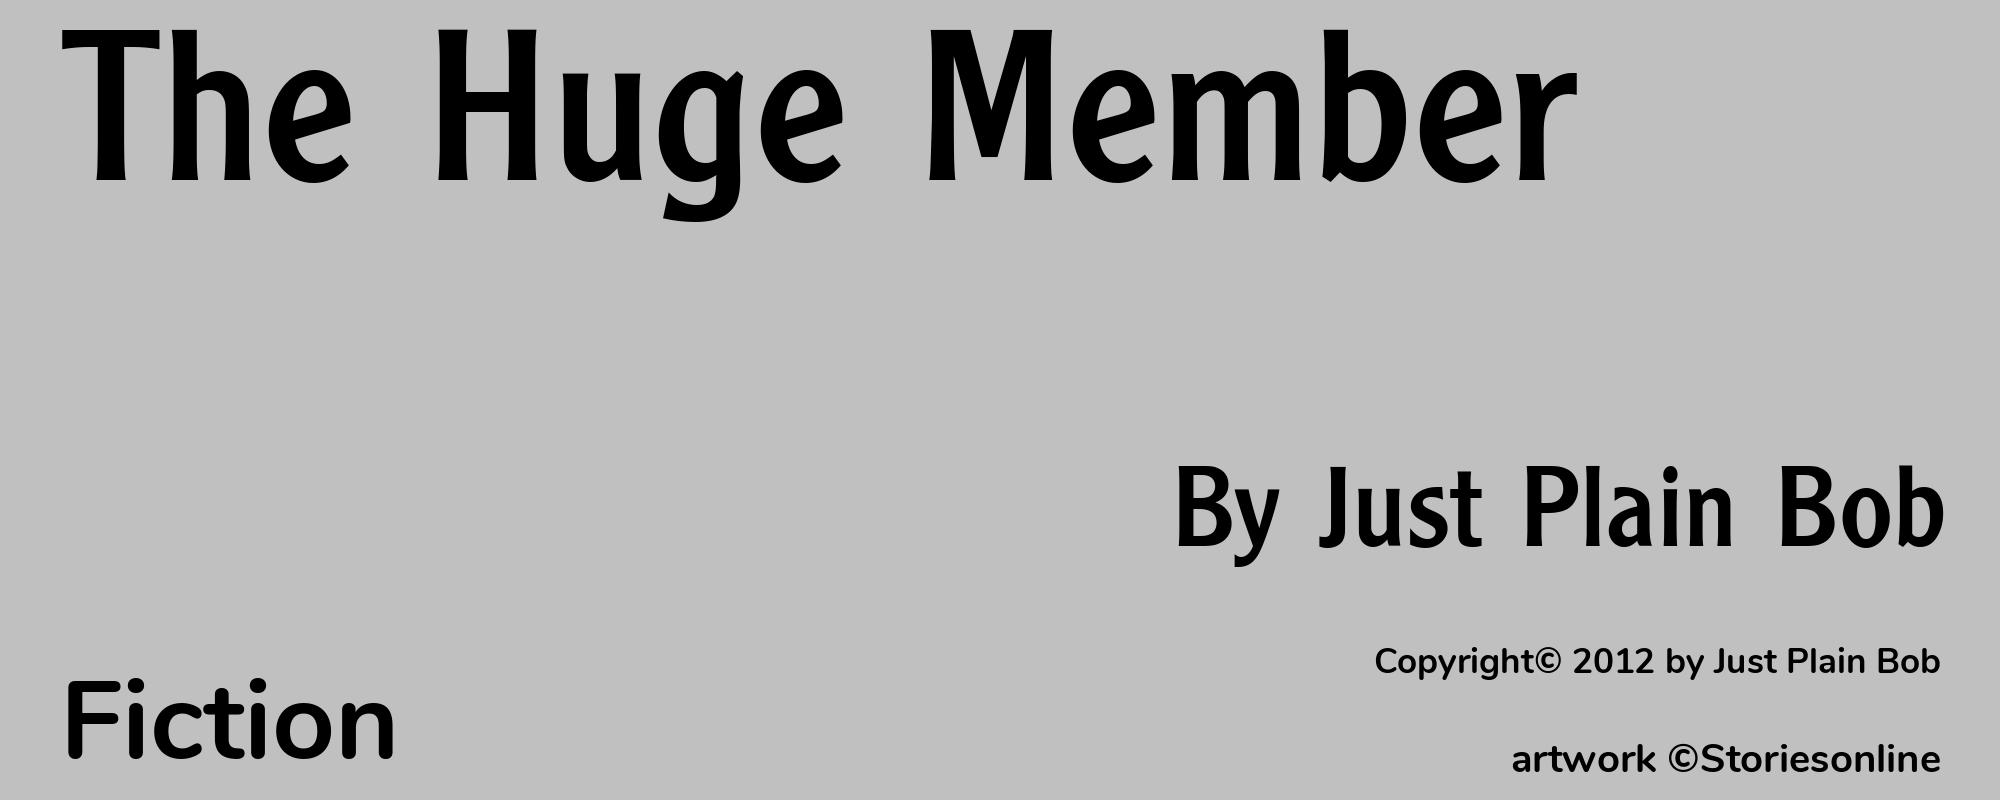 The Huge Member - Cover